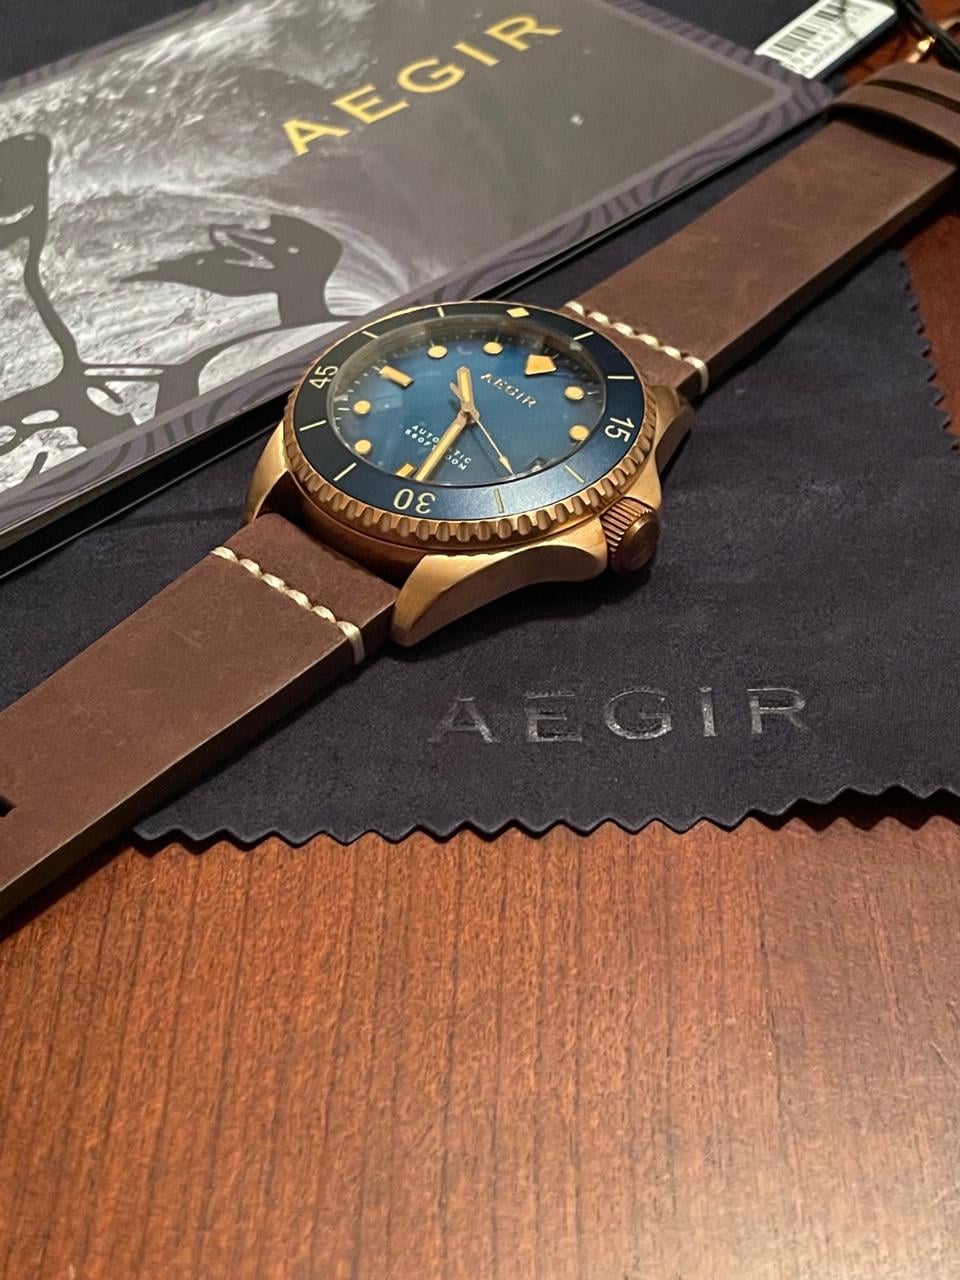 Aegir] Kriger in cherry. Haven't really seen many posted. : r/Watches